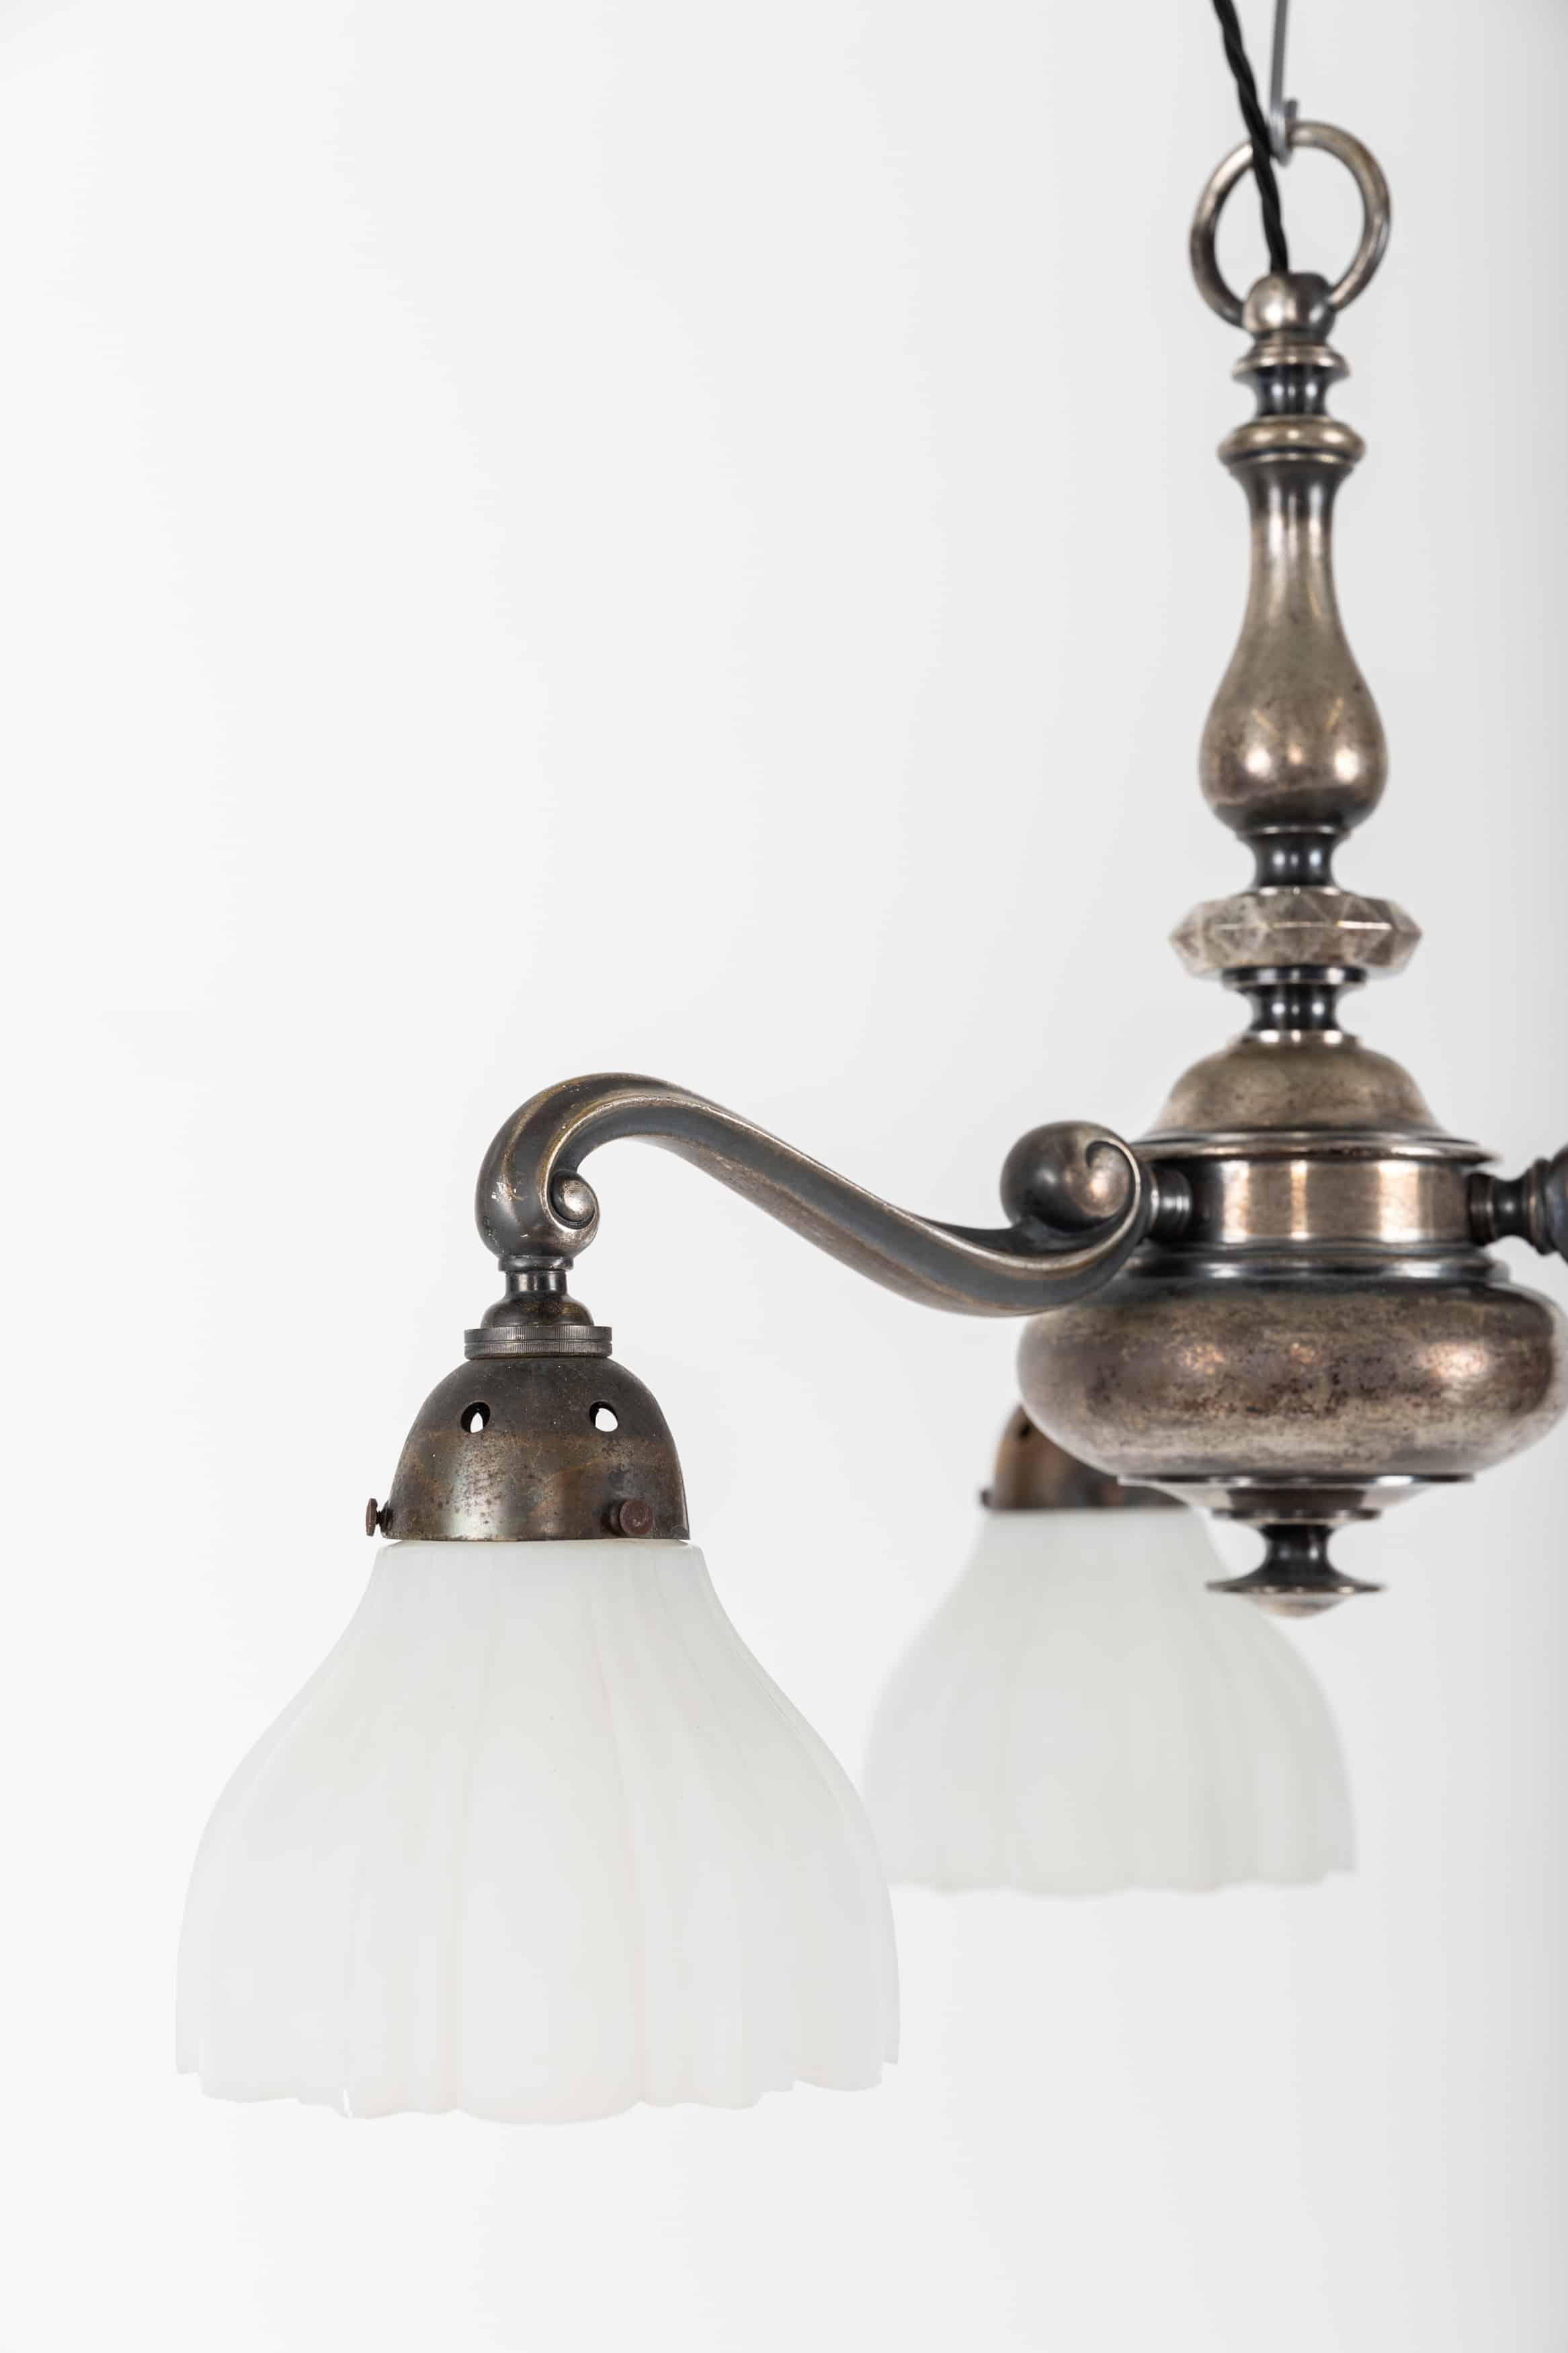 An elegantly formed three-arm ceiling pendant with opaline glass shades. c.1920

Made entirely of silver plated brass which has aged and tarnished over the past century to leave a stunning patina. Three pressed matte opaline perimeter shades